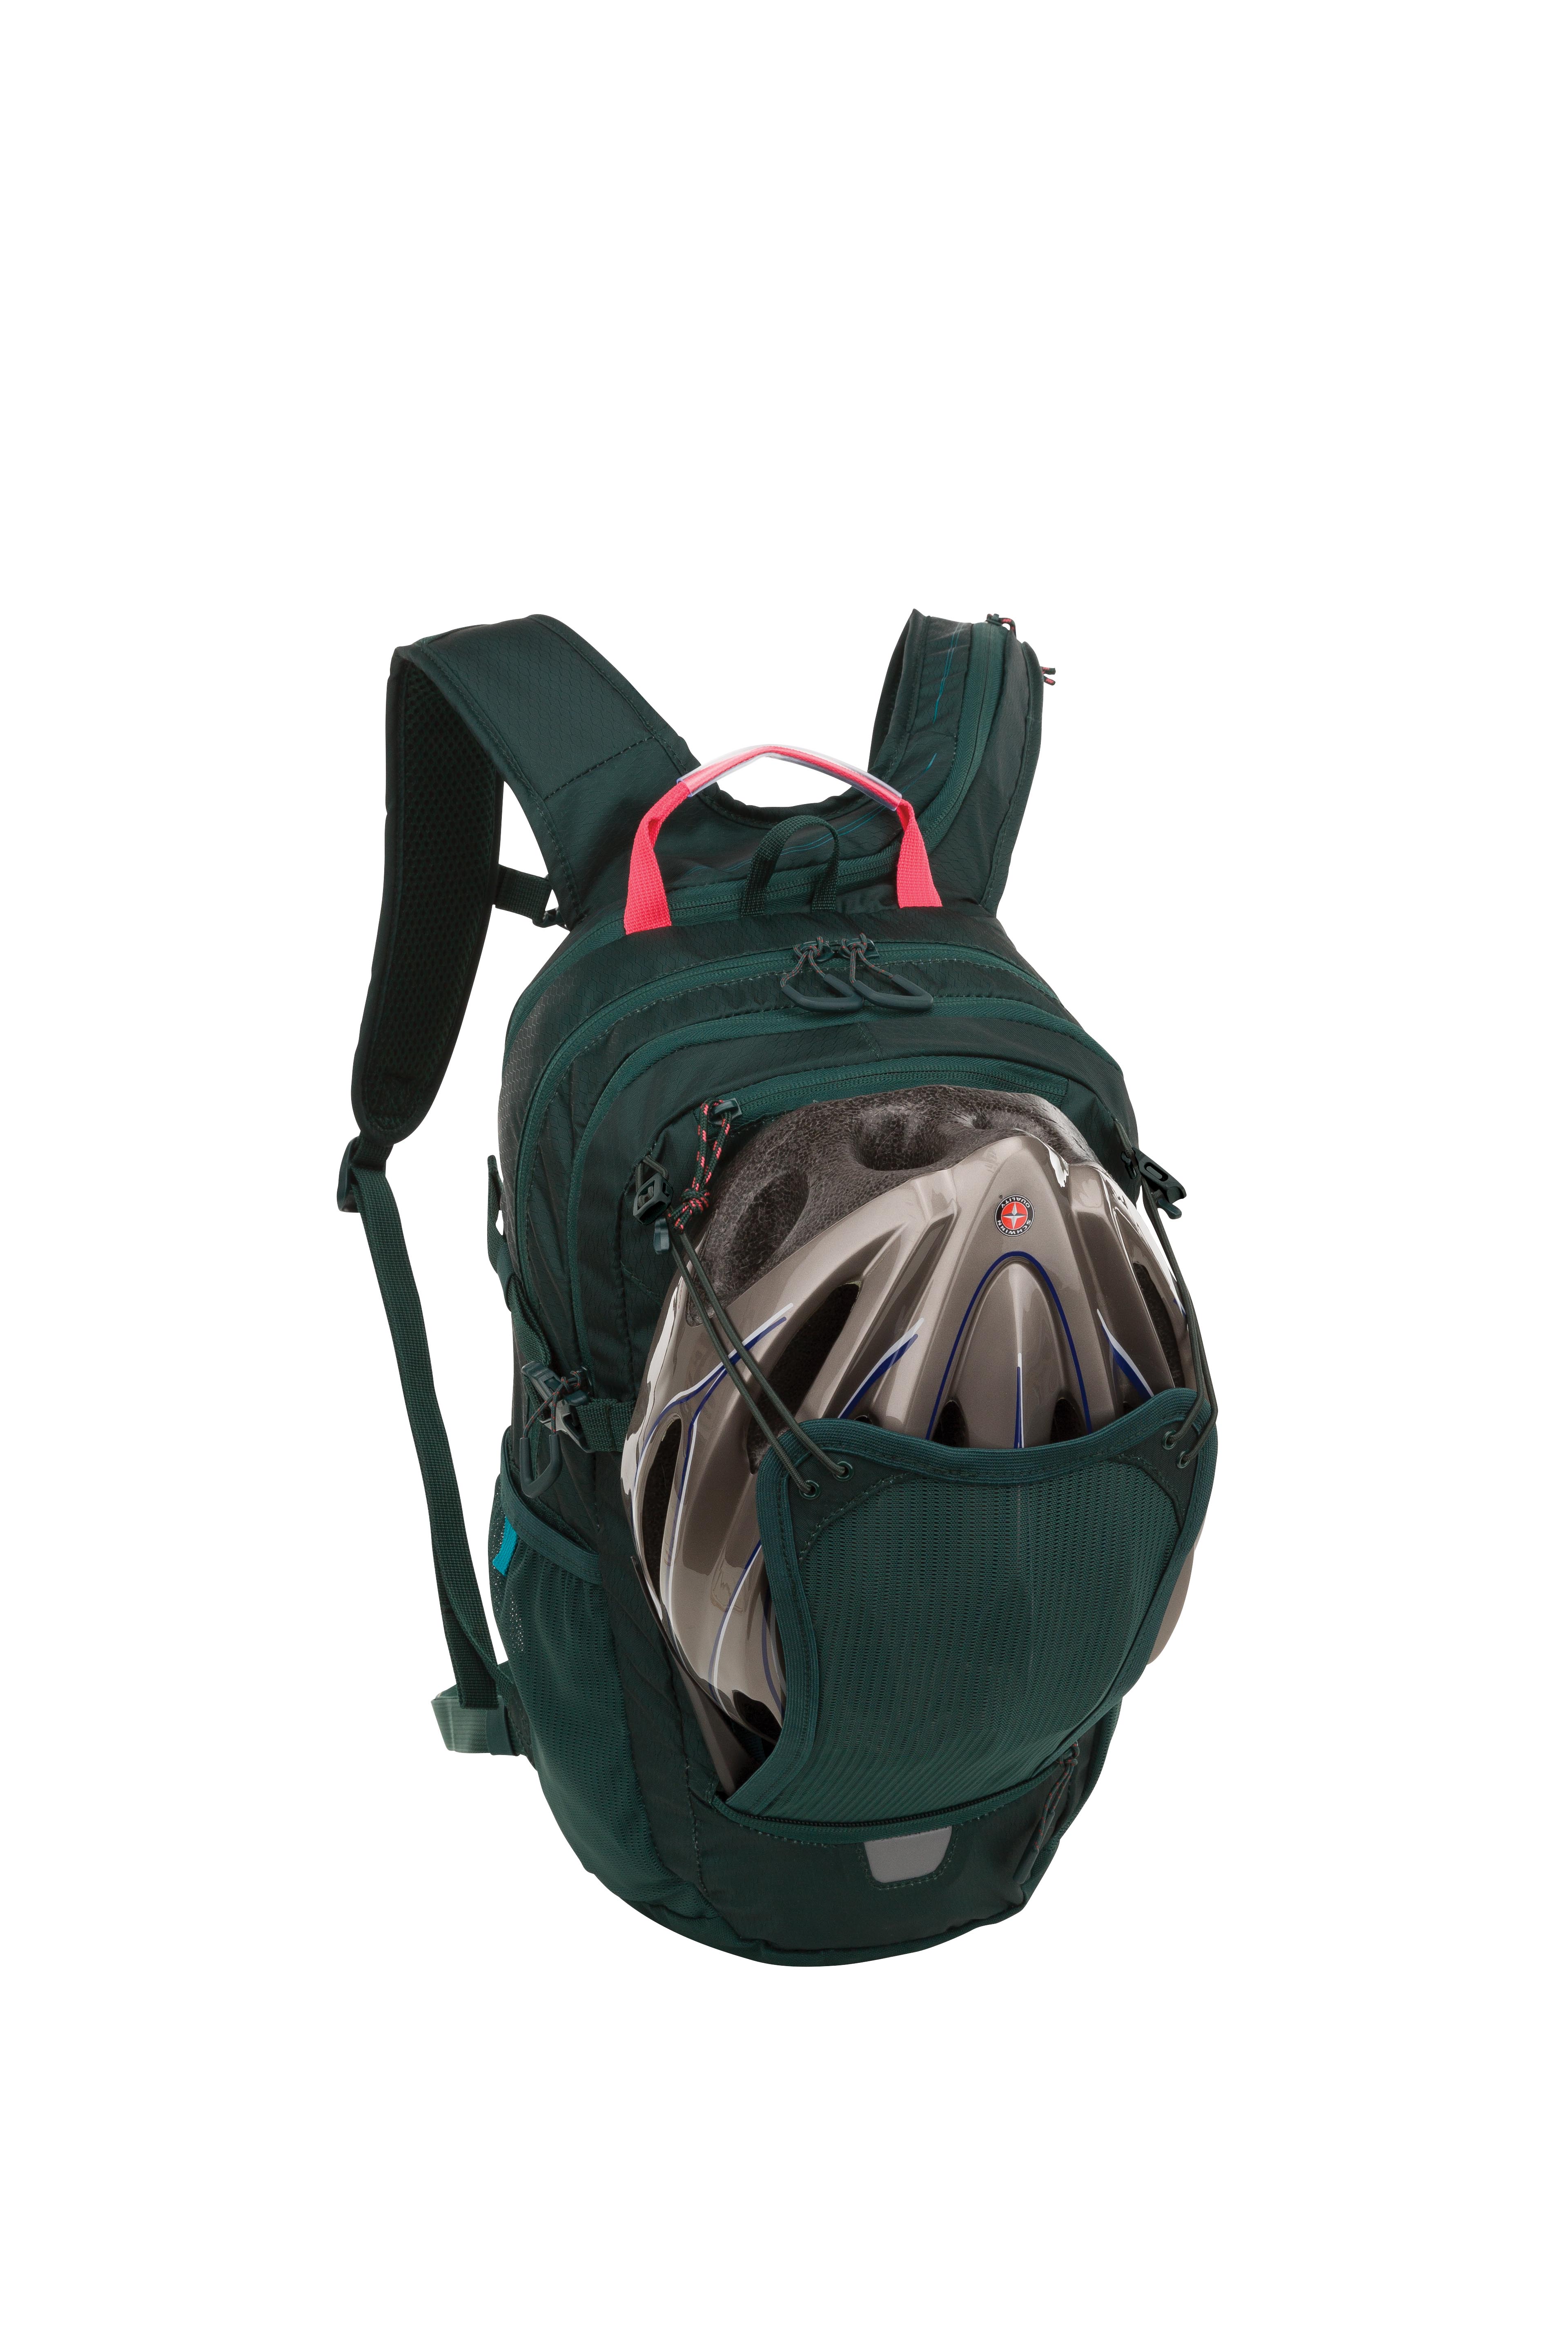 Outdoor Products 17 Ltr Deluxe Hydration Pack, with 2-Liter Reservoir, Green, Unisex, Lightweight - image 3 of 9